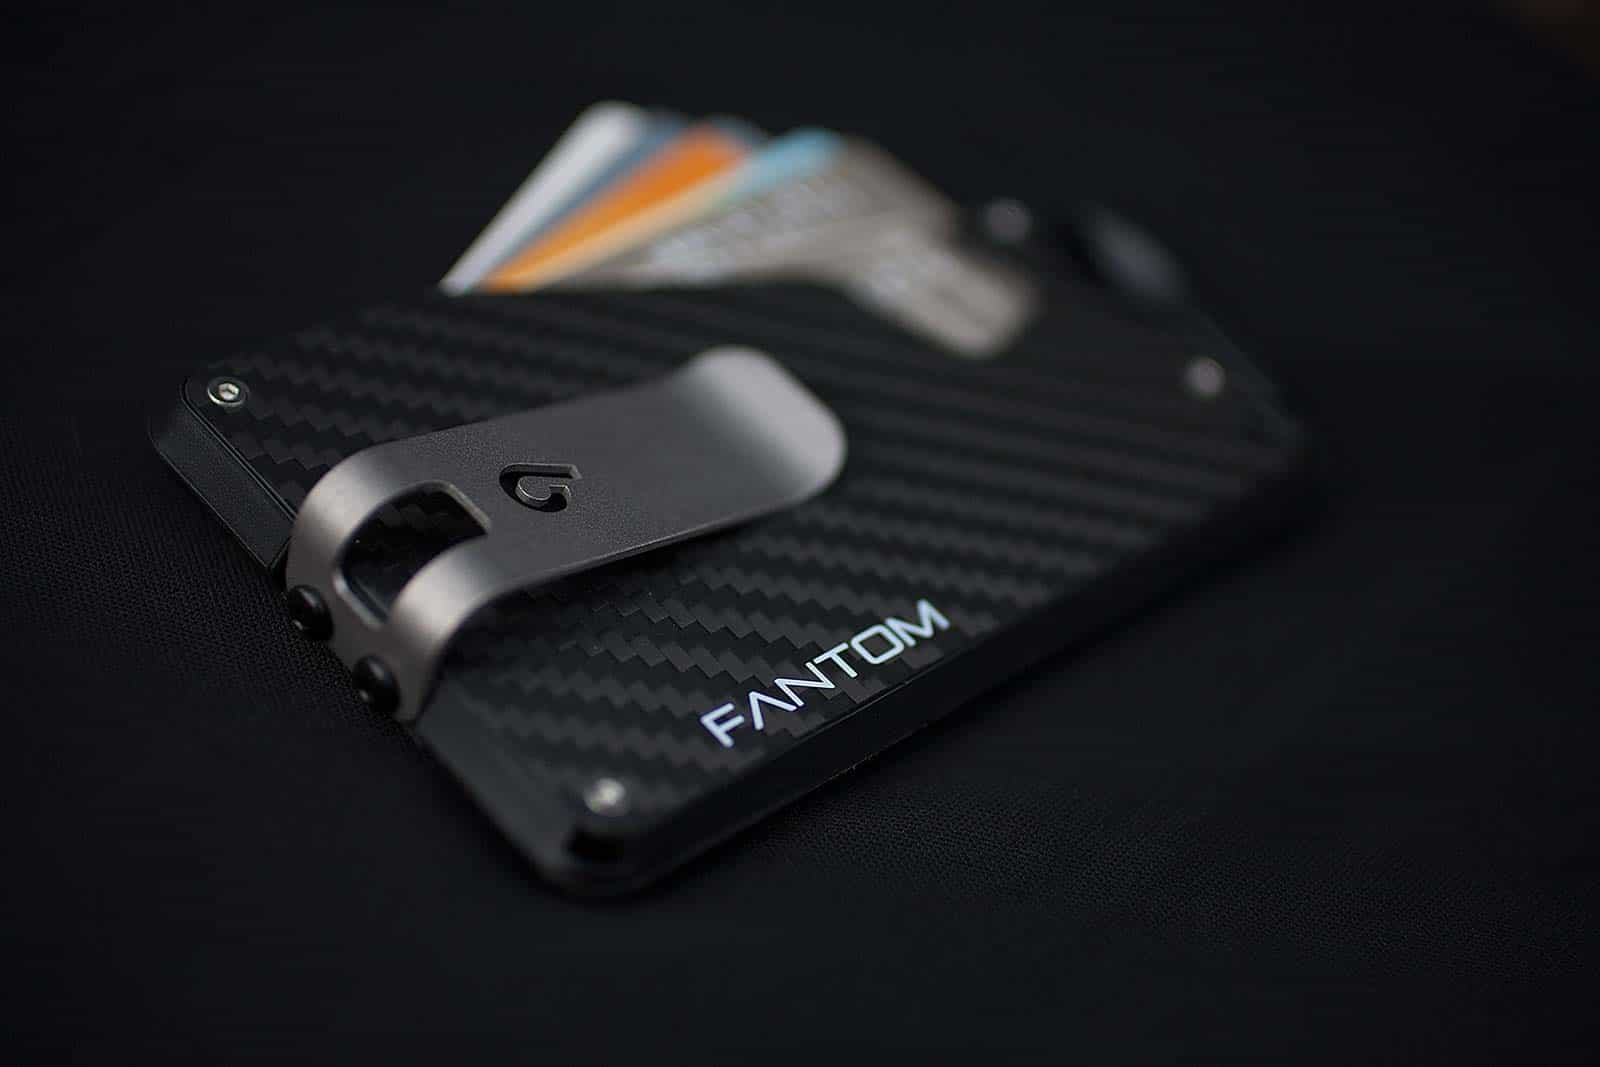 The Fantom Wallet by Ansix Designs stays slim even as you pack it with cards and cash.